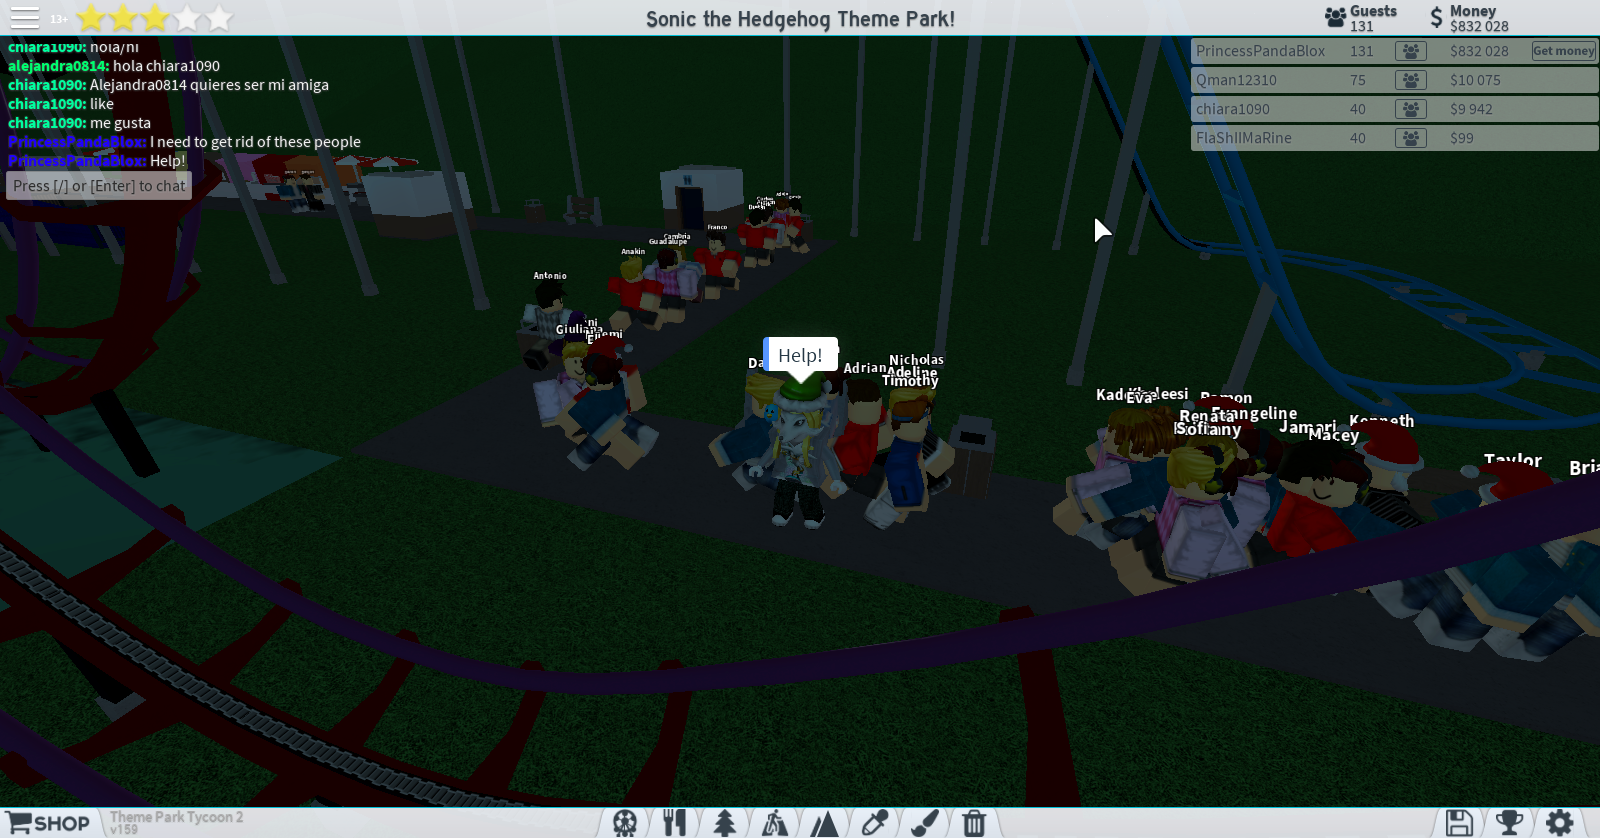 How Do I Get Rid Of These People Theme Park Tycoon 2 Wikia Fandom - entrance roblox theme park tycoon ideas